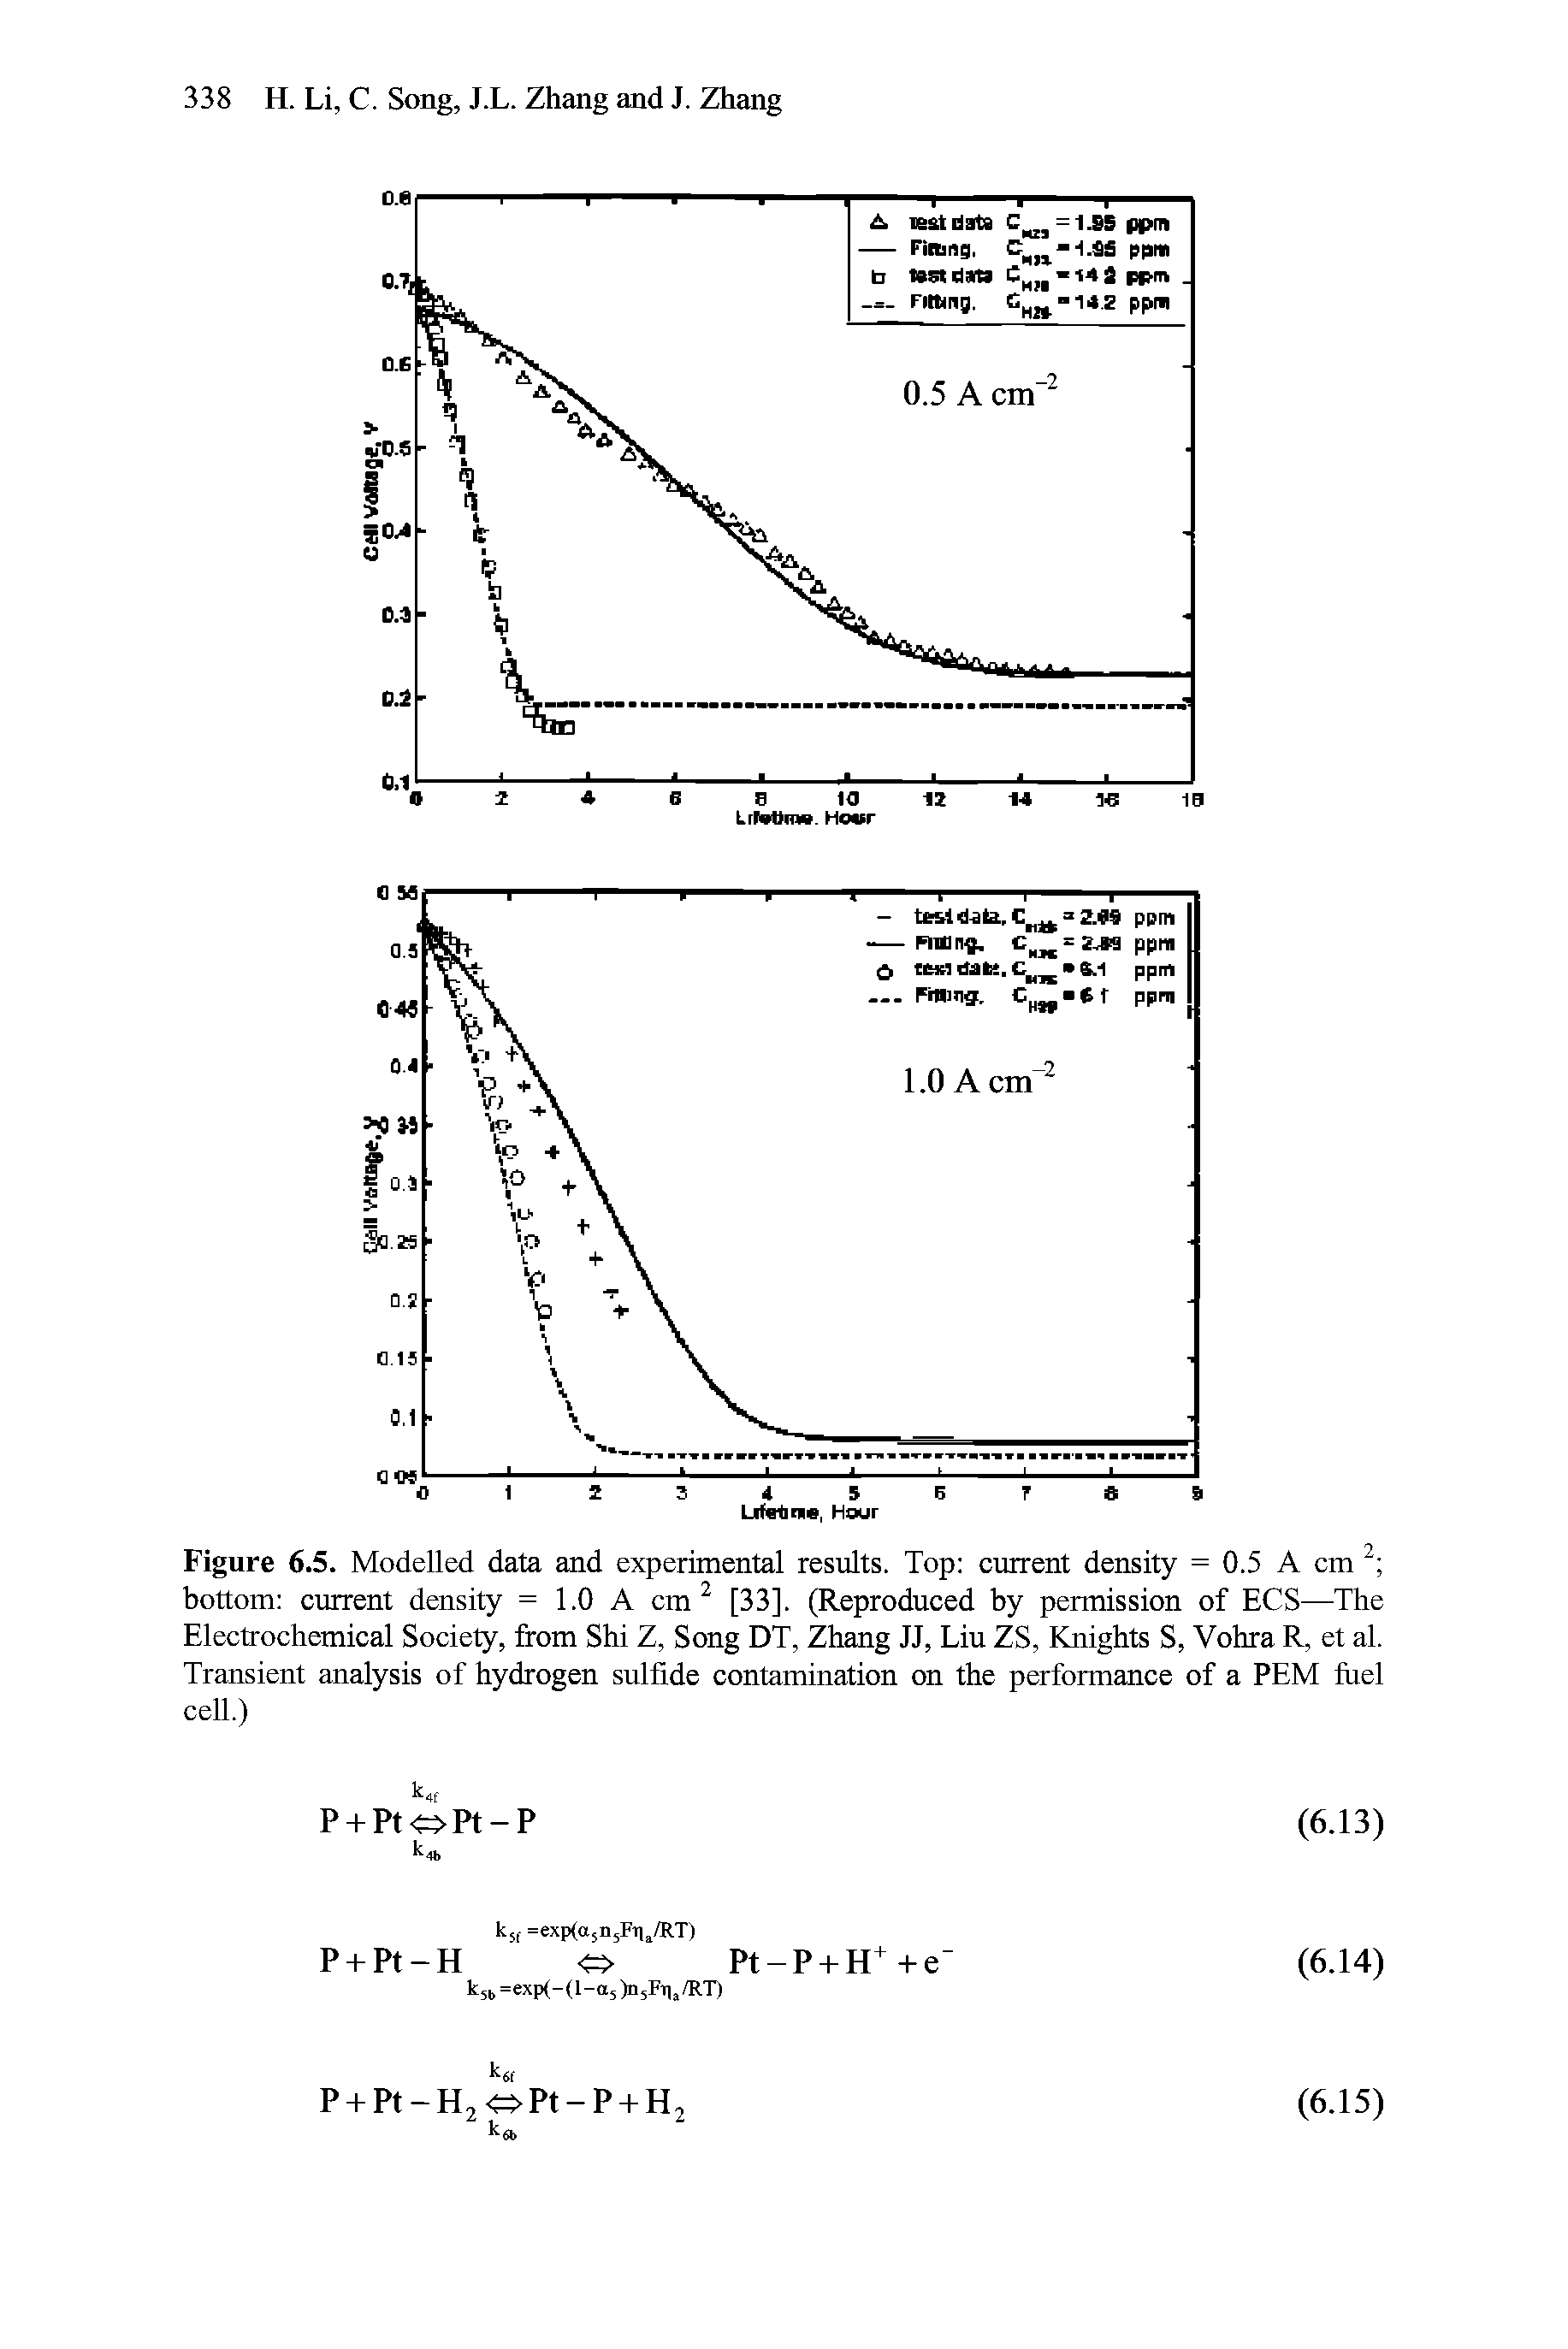 Figure 6.5. Modelled data and experimental results. Top current density = 0.5 A cm bottom current density = 1.0 A cm [33]. (Reproduced by permission of ECS—The Electrochemical Society, from Shi Z, Song DT, Zhang JJ, Liu ZS, Knights S, Vohra R, et al. Transient analysis of hydrogen sulfide contamination on the performance of a PEM fuel cell.)...